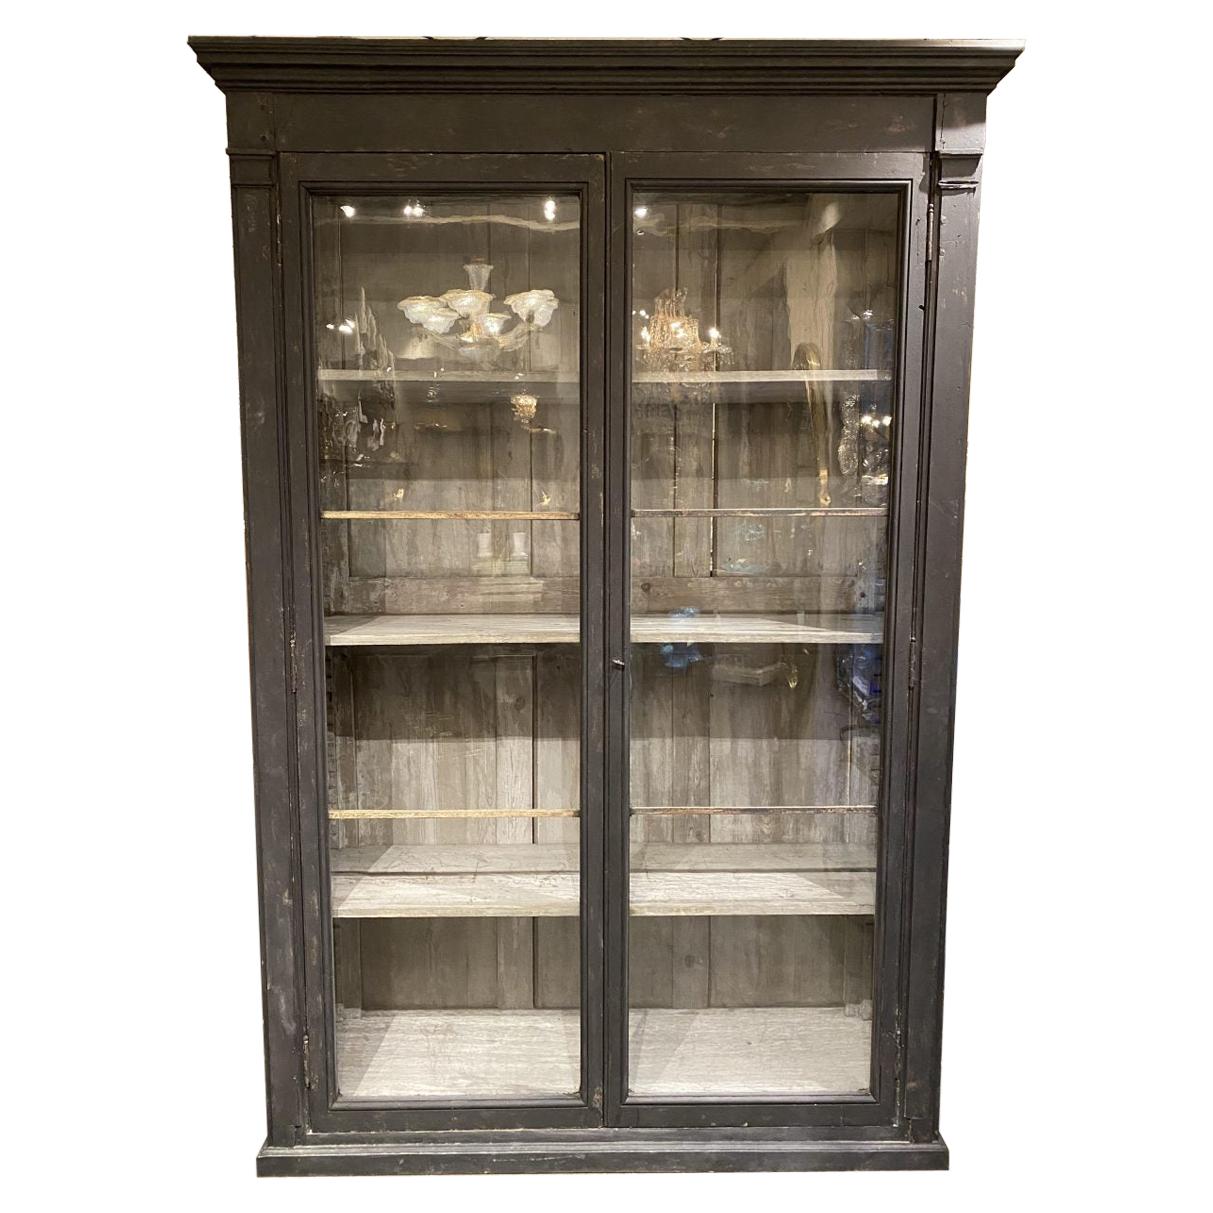 Very Tall, Handsome Rare Antique Display Cabinet